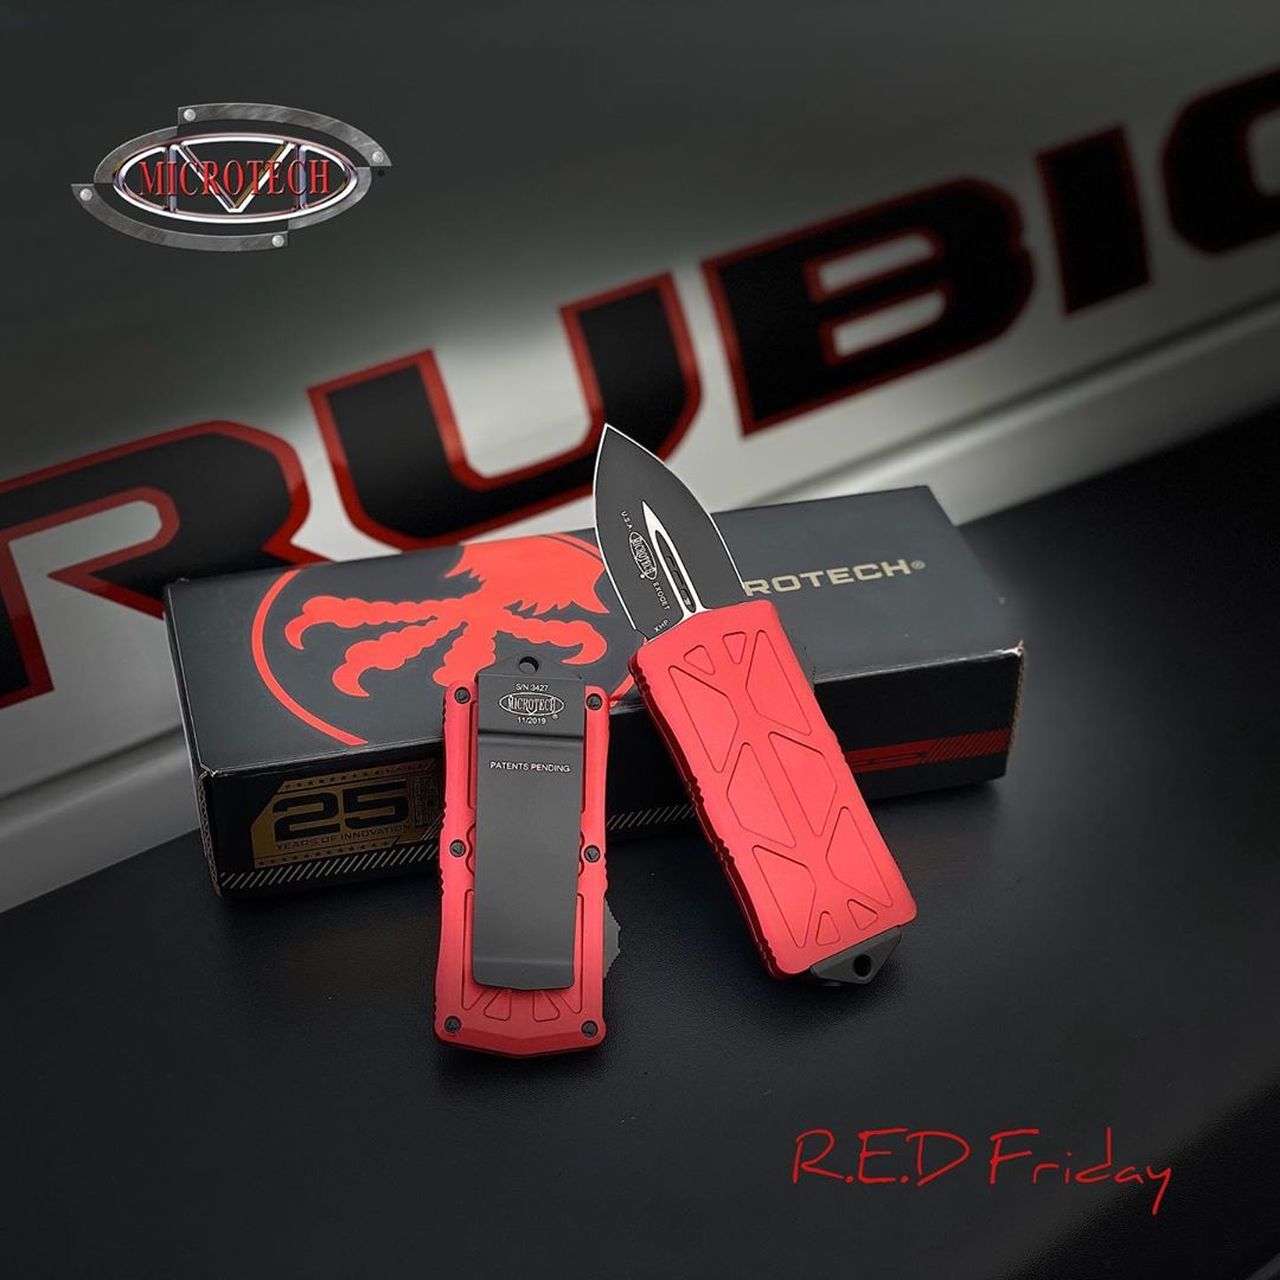 Microtech Exocet, Red